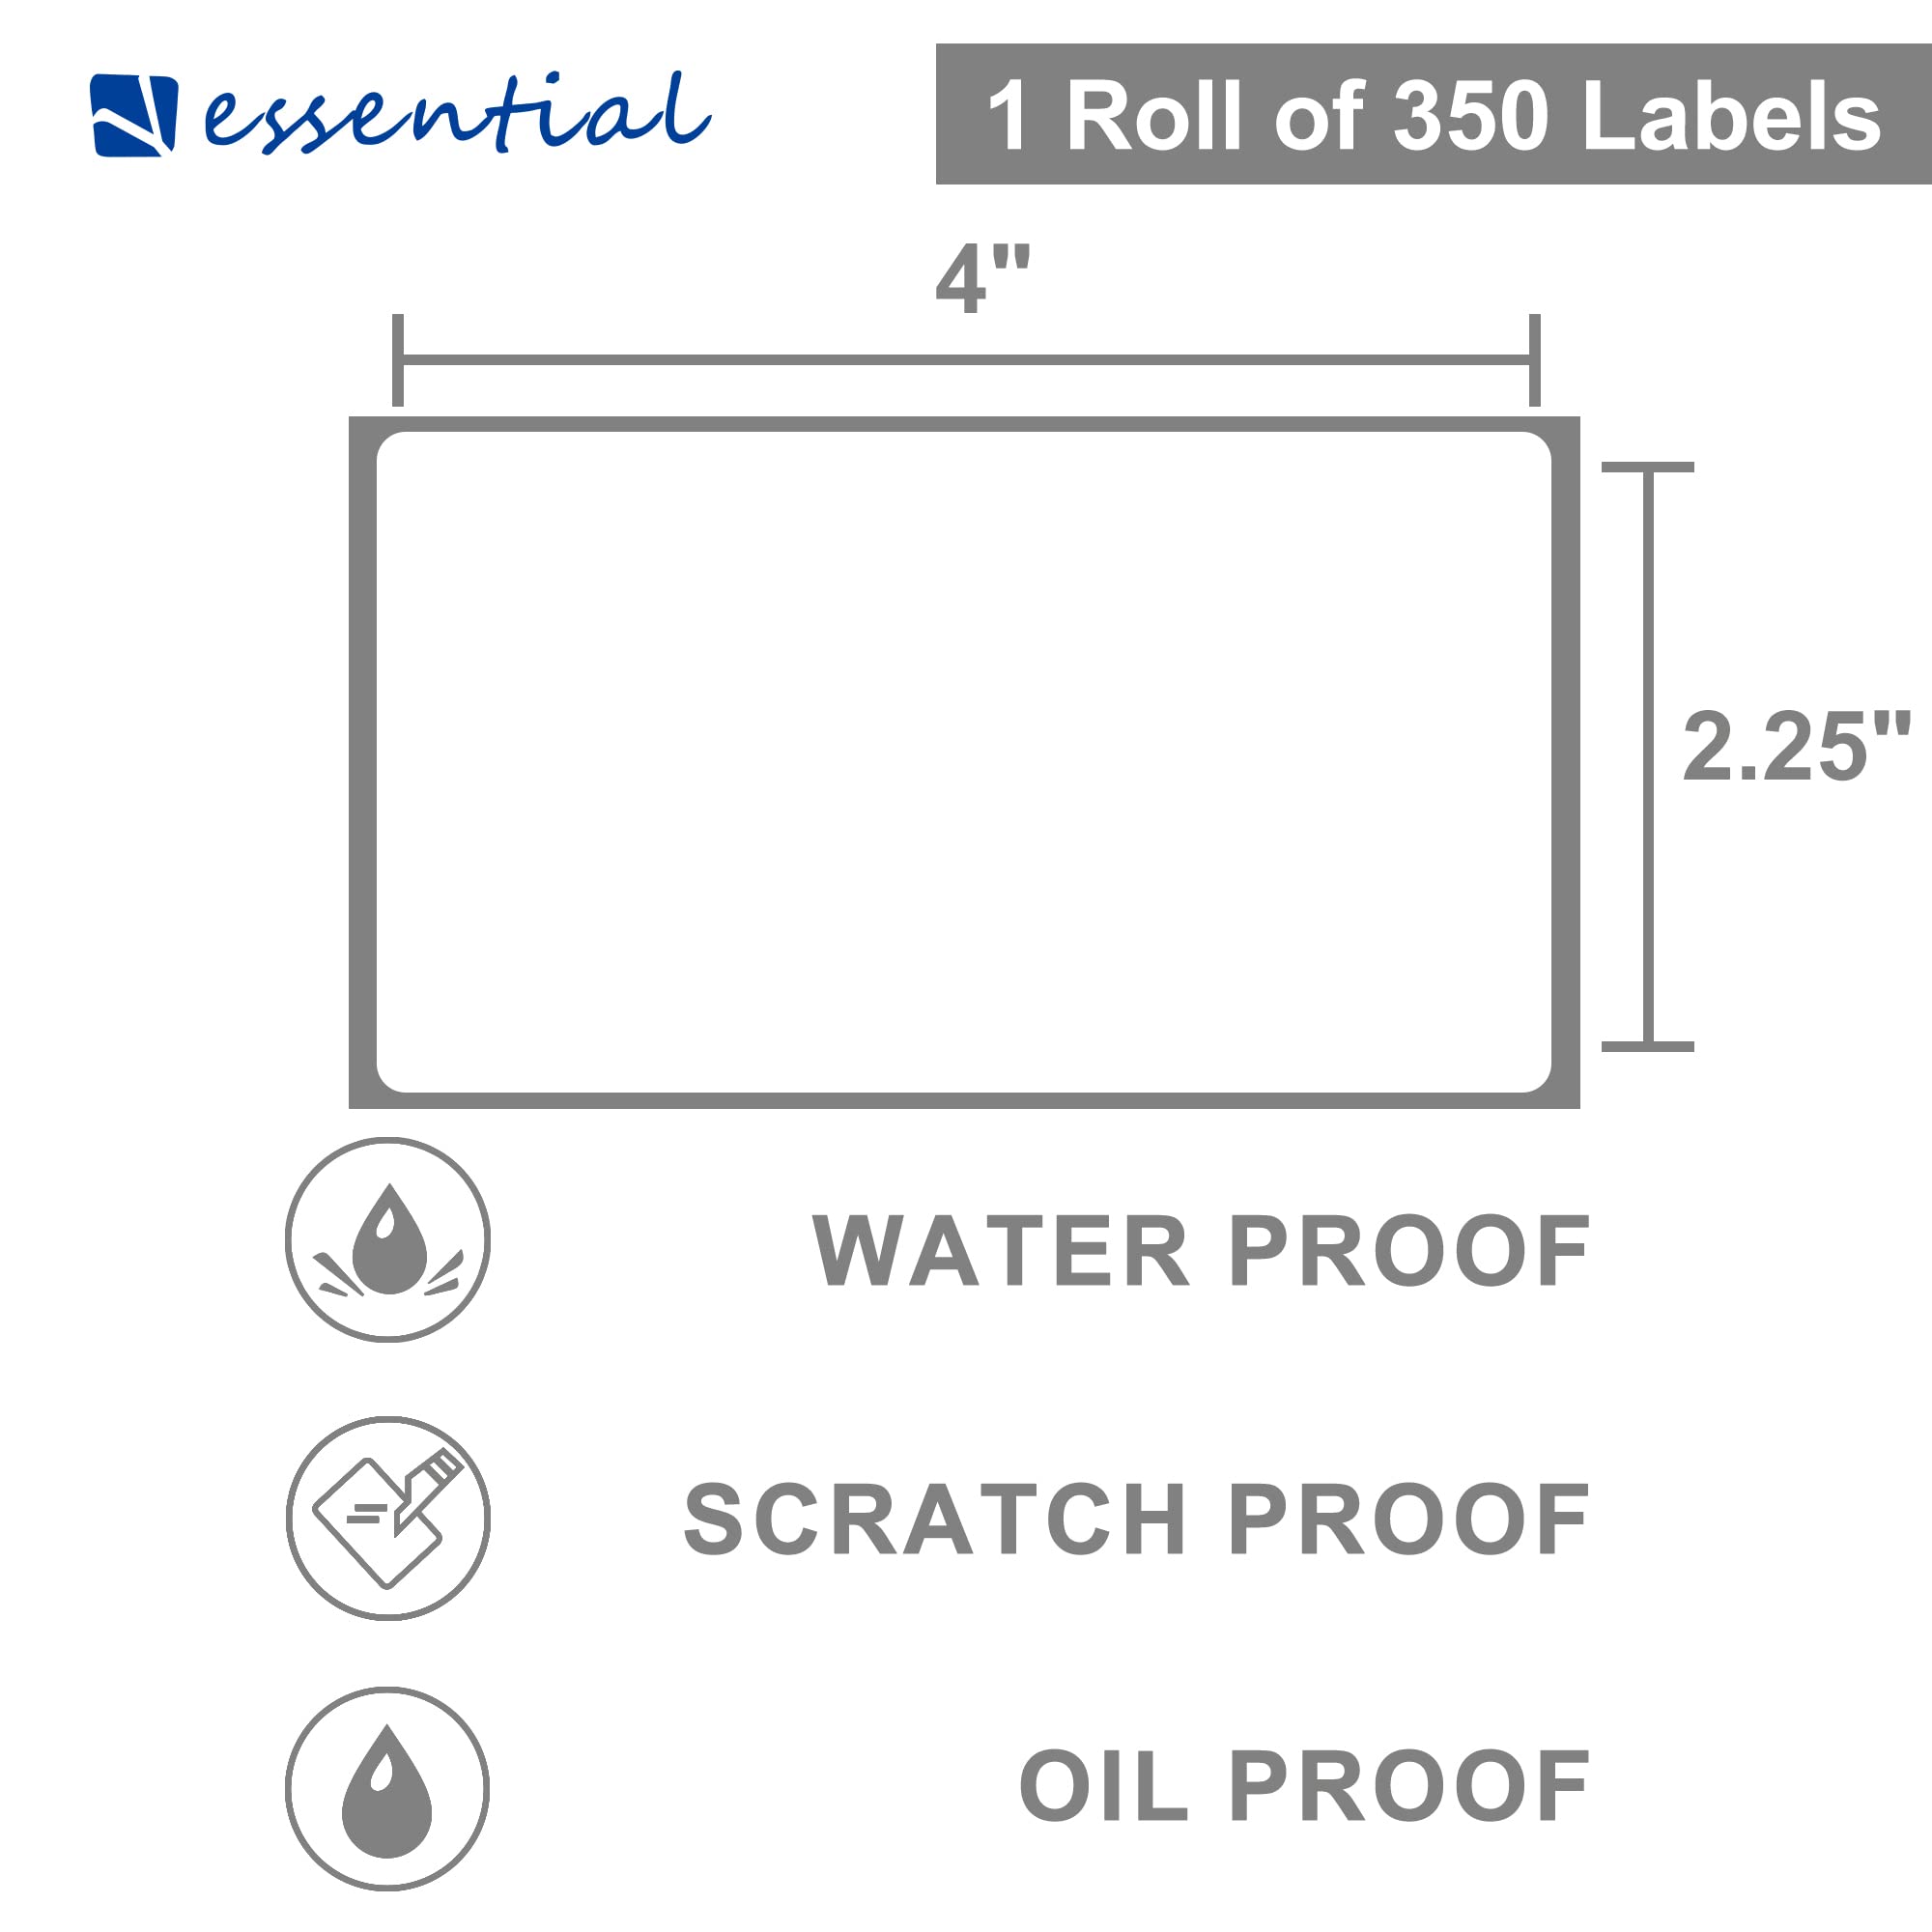 ESSENTIAL 2.25"x 4" White Direct Thermal Barcode Labels, Shipping Labels, Compatible with Zebra & Rollo Label Printer, 350 Labels of Roll (1 Roll)